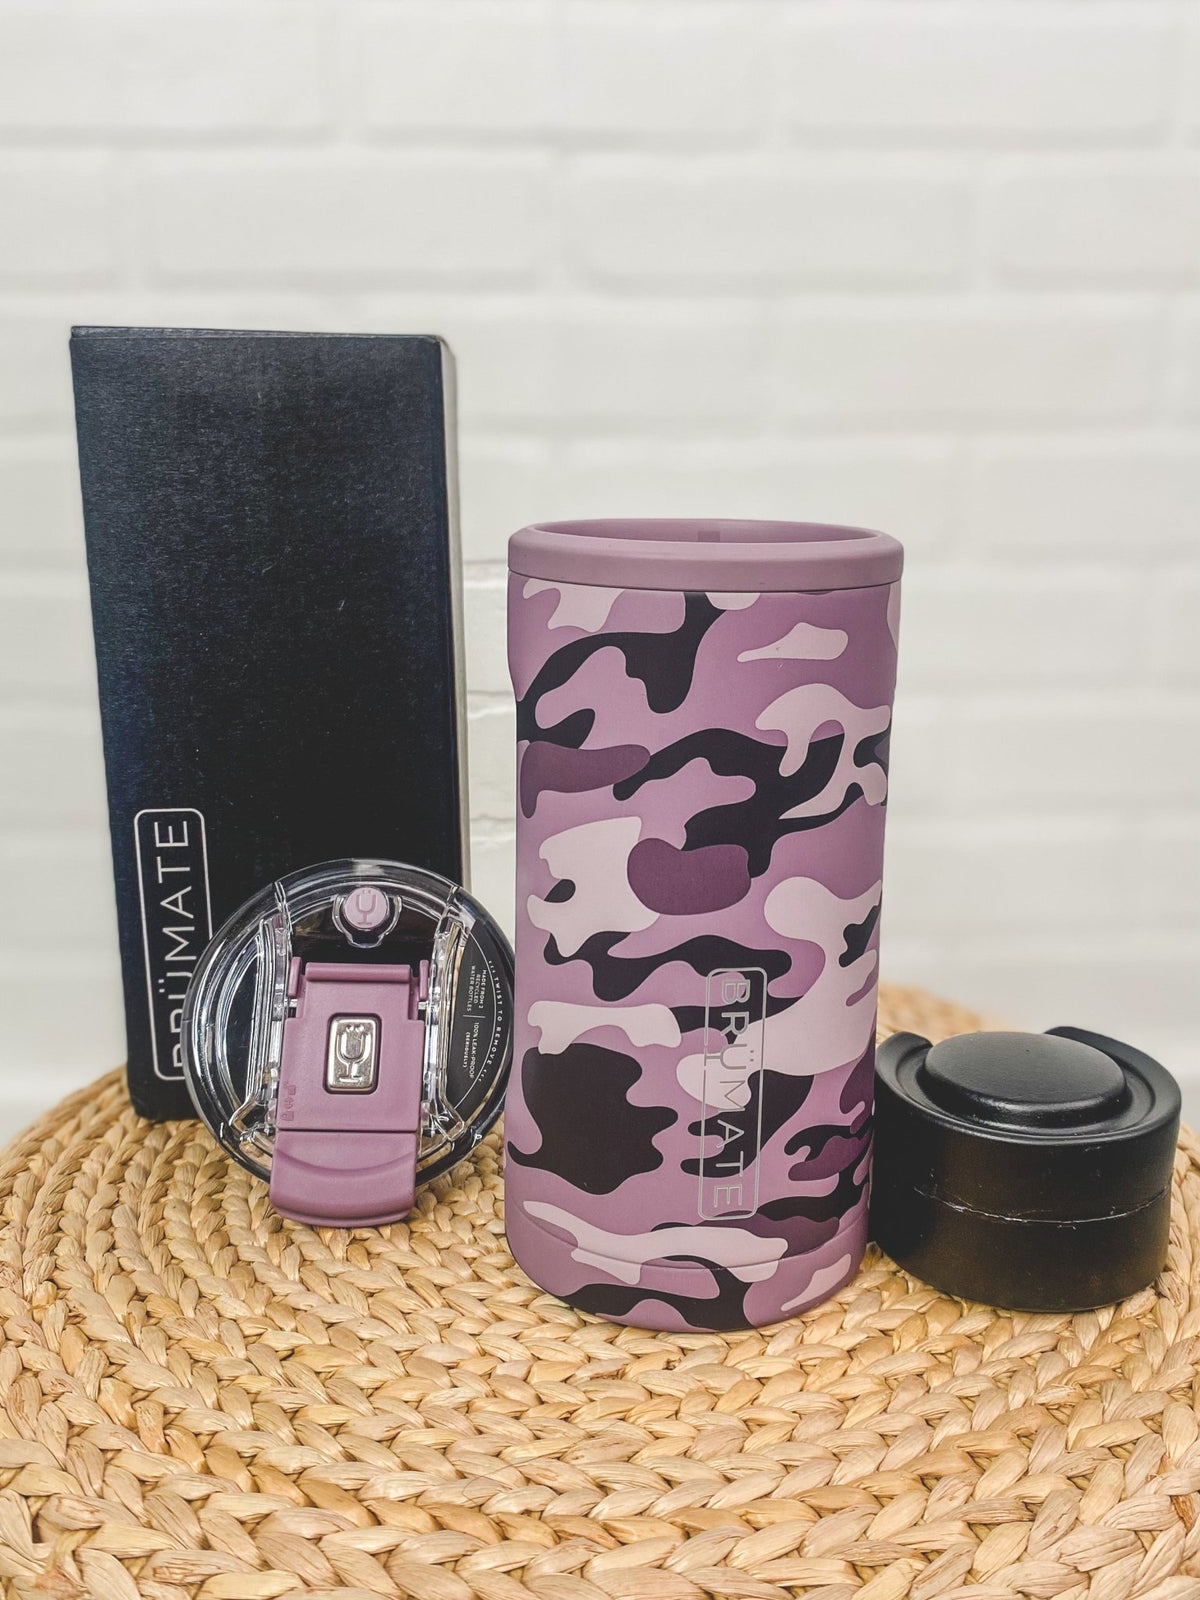 BruMate hopsulator trio 3 in 1 mauve camo - BruMate Drinkware, Tumblers and Insulated Can Coolers at Lush Fashion Lounge Trendy Boutique in Oklahoma City